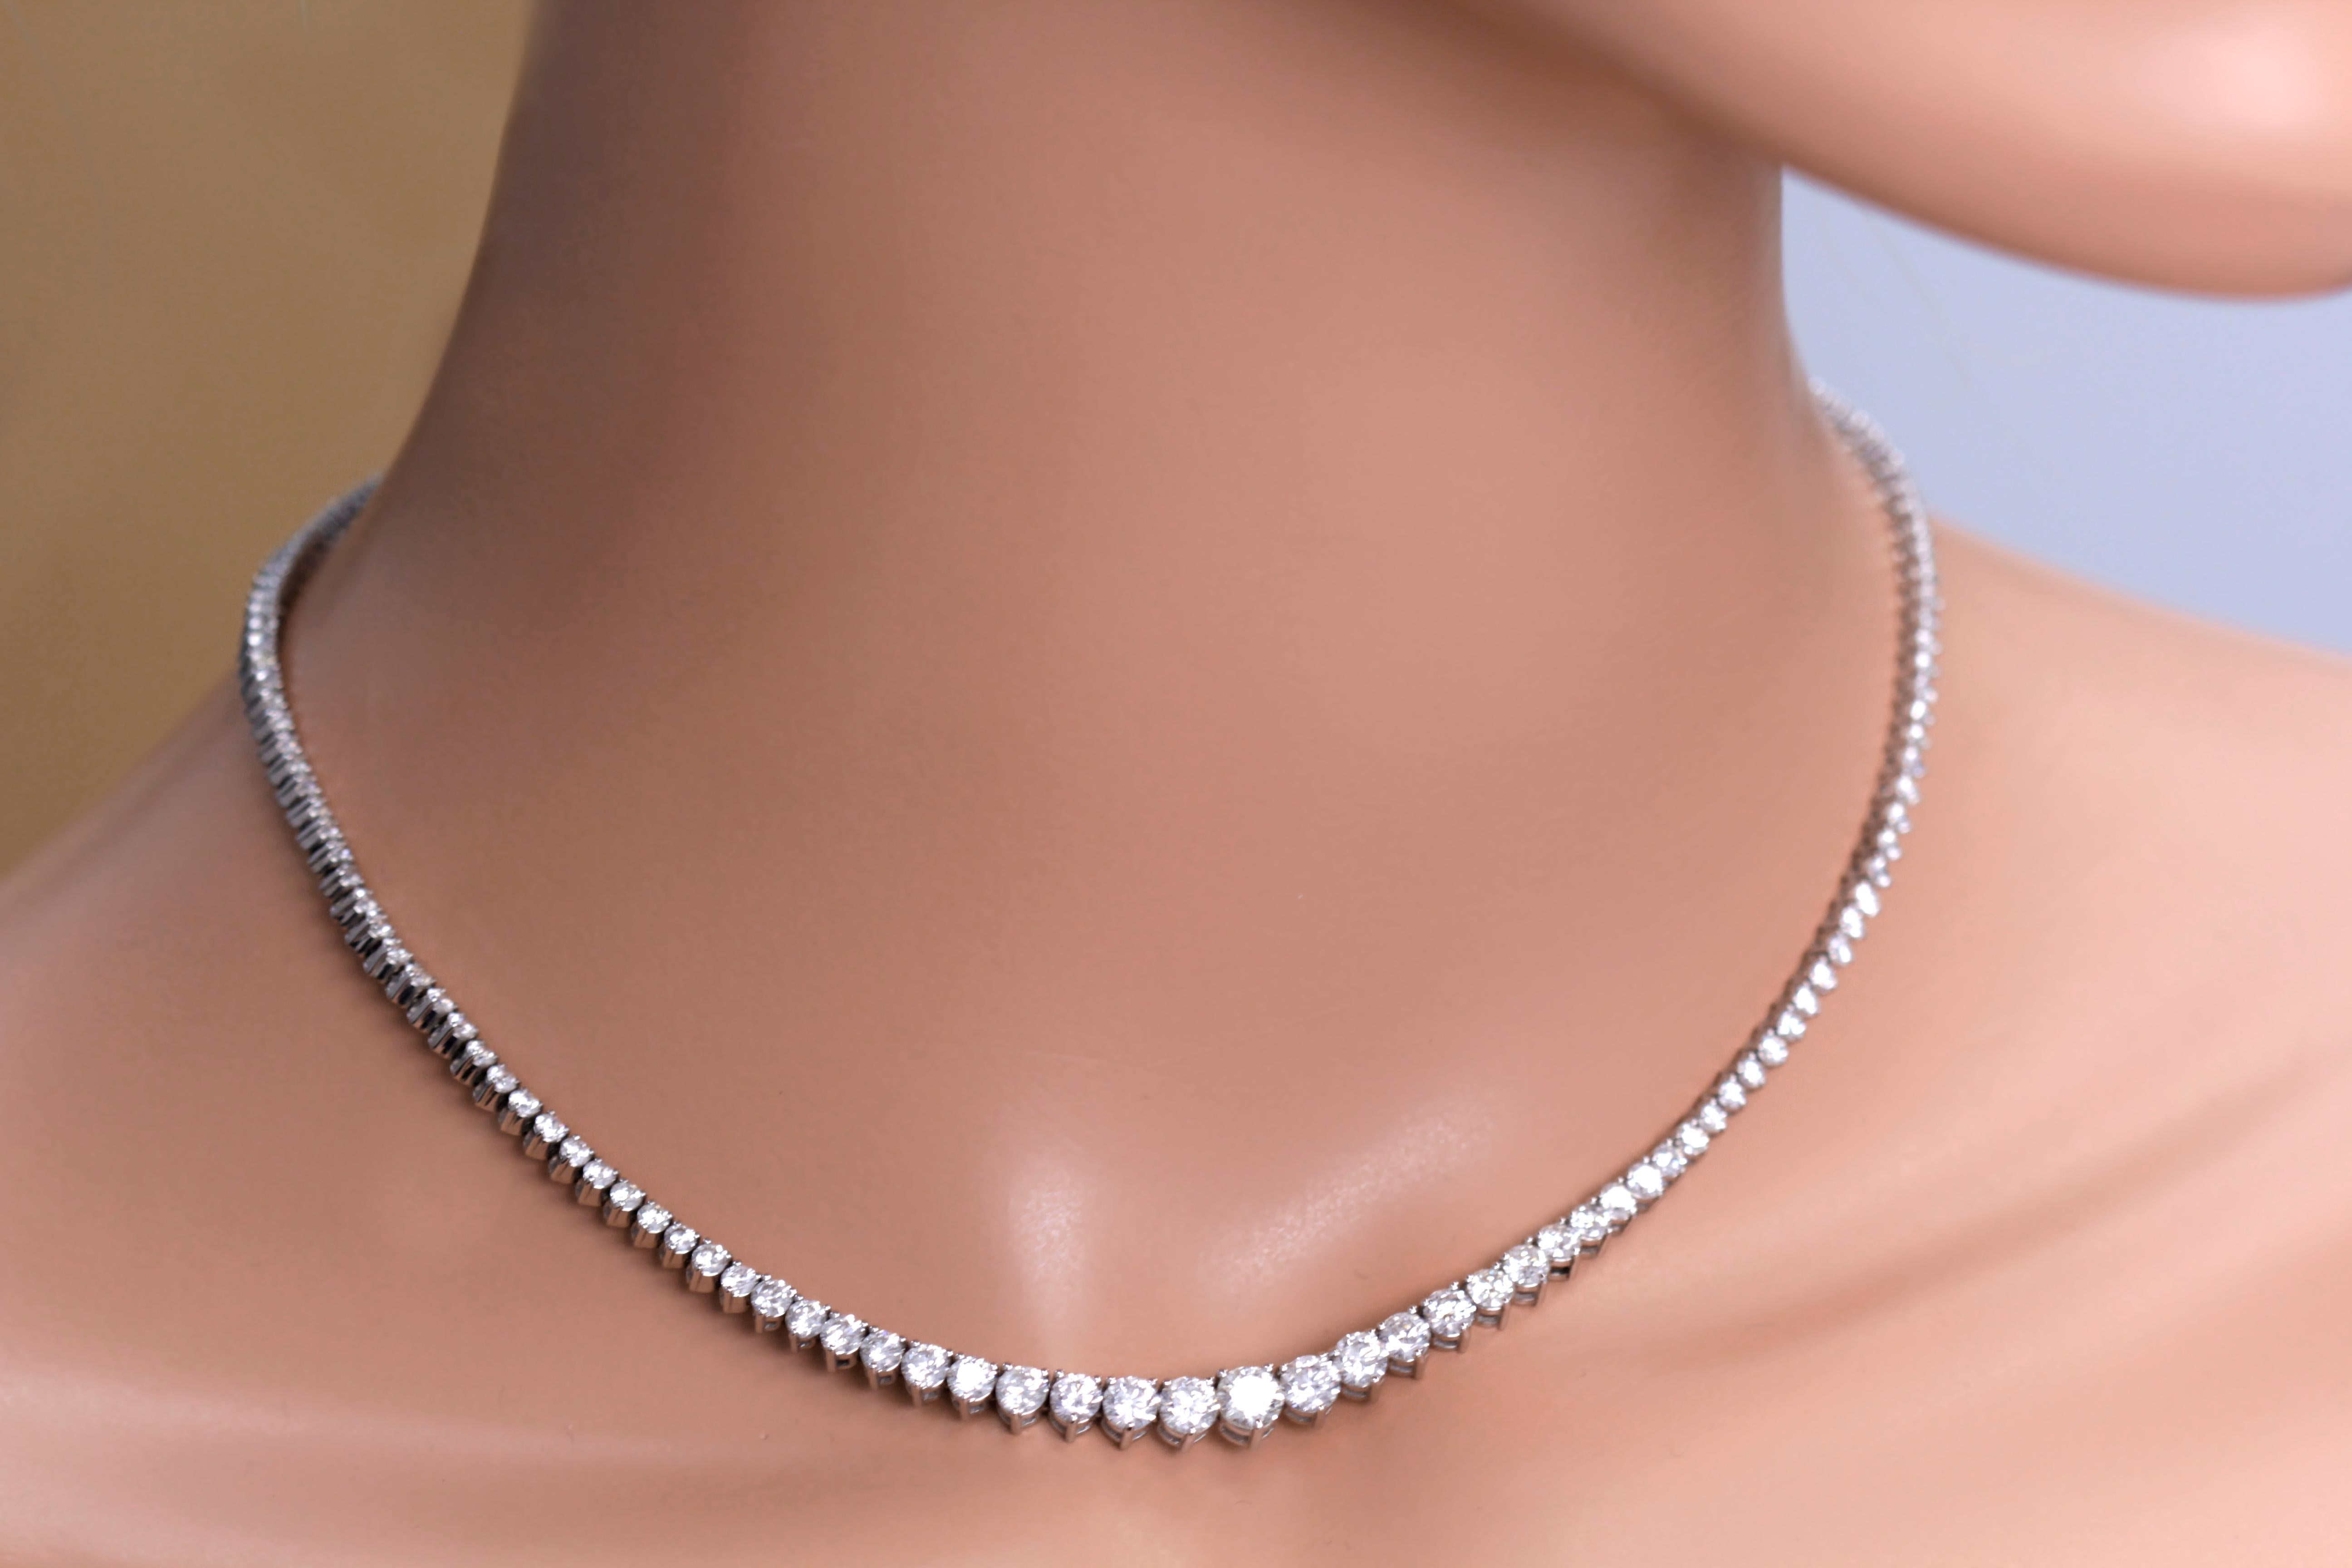 Round Cut 5.34 Carat Graduated Round Diamond Necklace in 14k White Gold ref103 For Sale